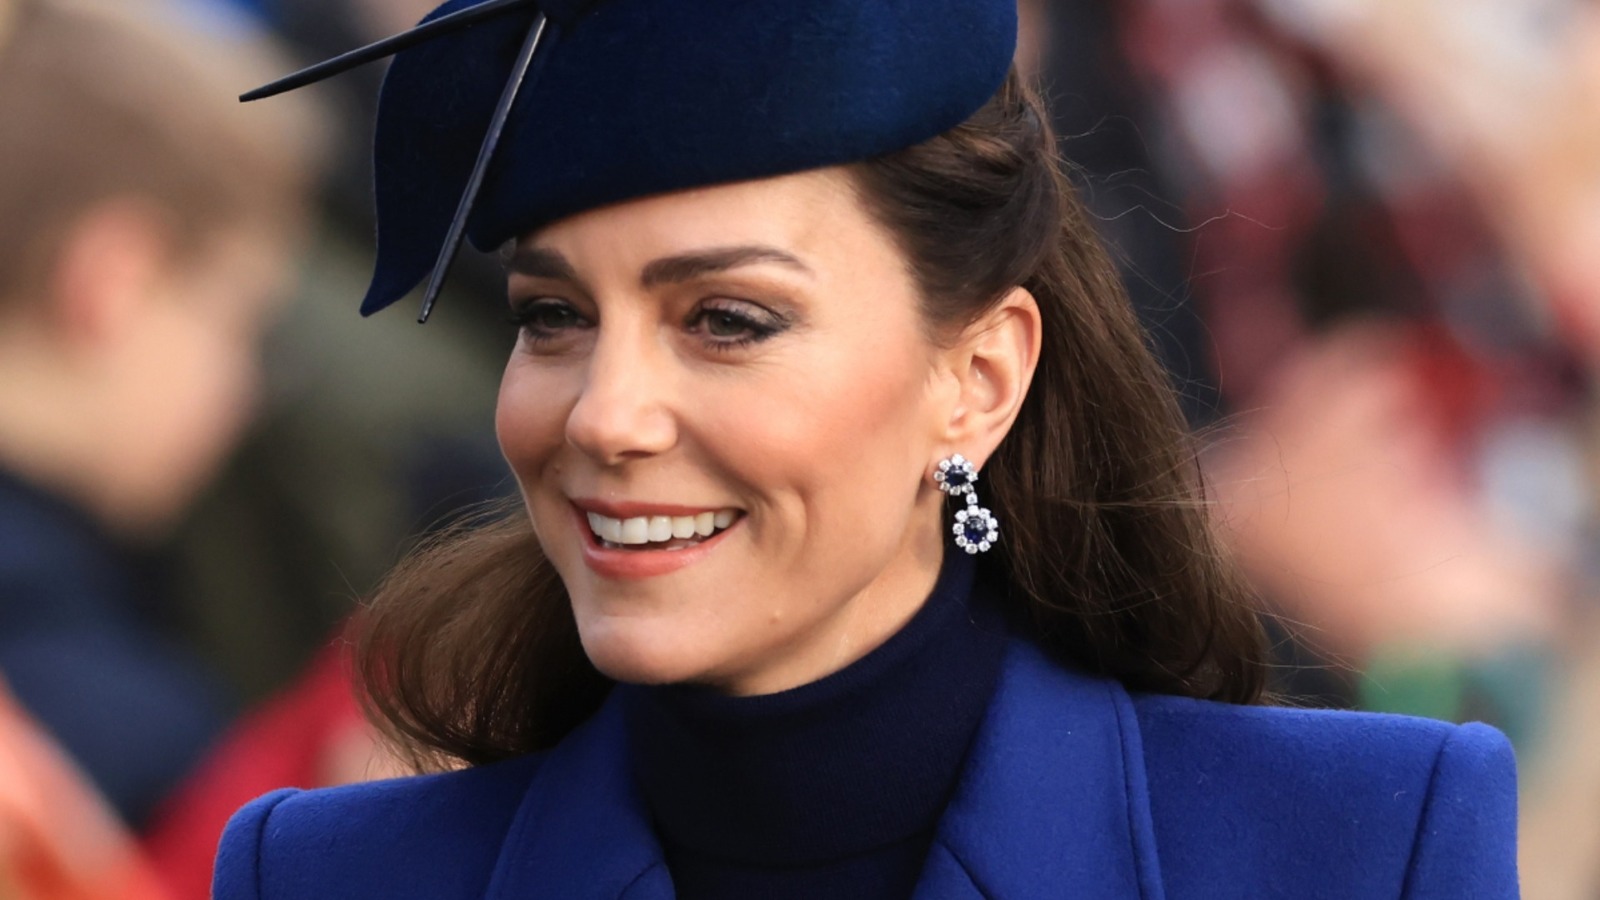 What It's Really Like To Stay In The Hospital If You're Kate Middleton